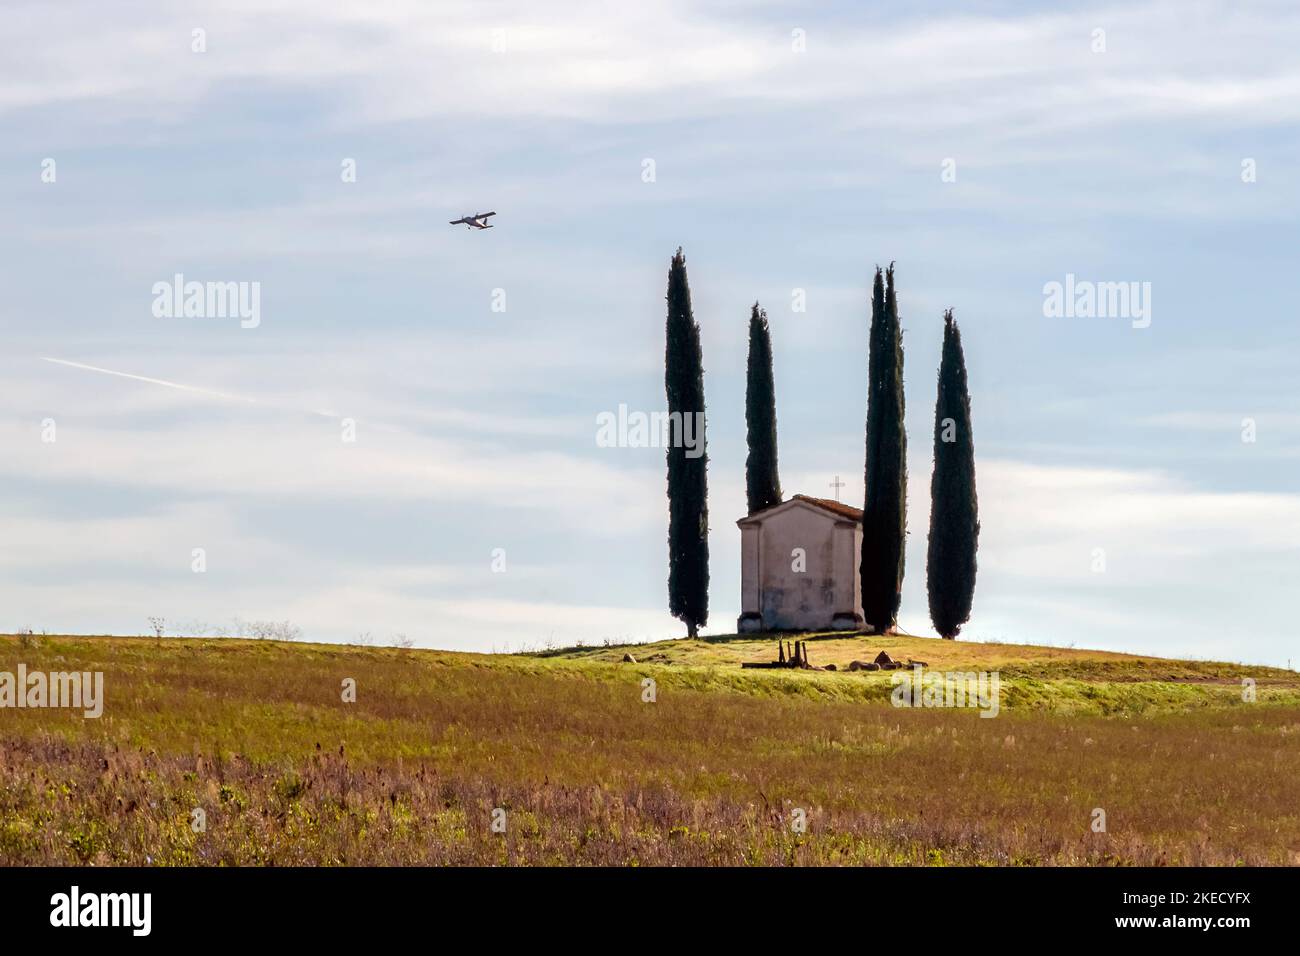 A small touring plane flies over the ancient Church of San Pierino in Camugliano, Ponsacco, Pisa, Italy Stock Photo